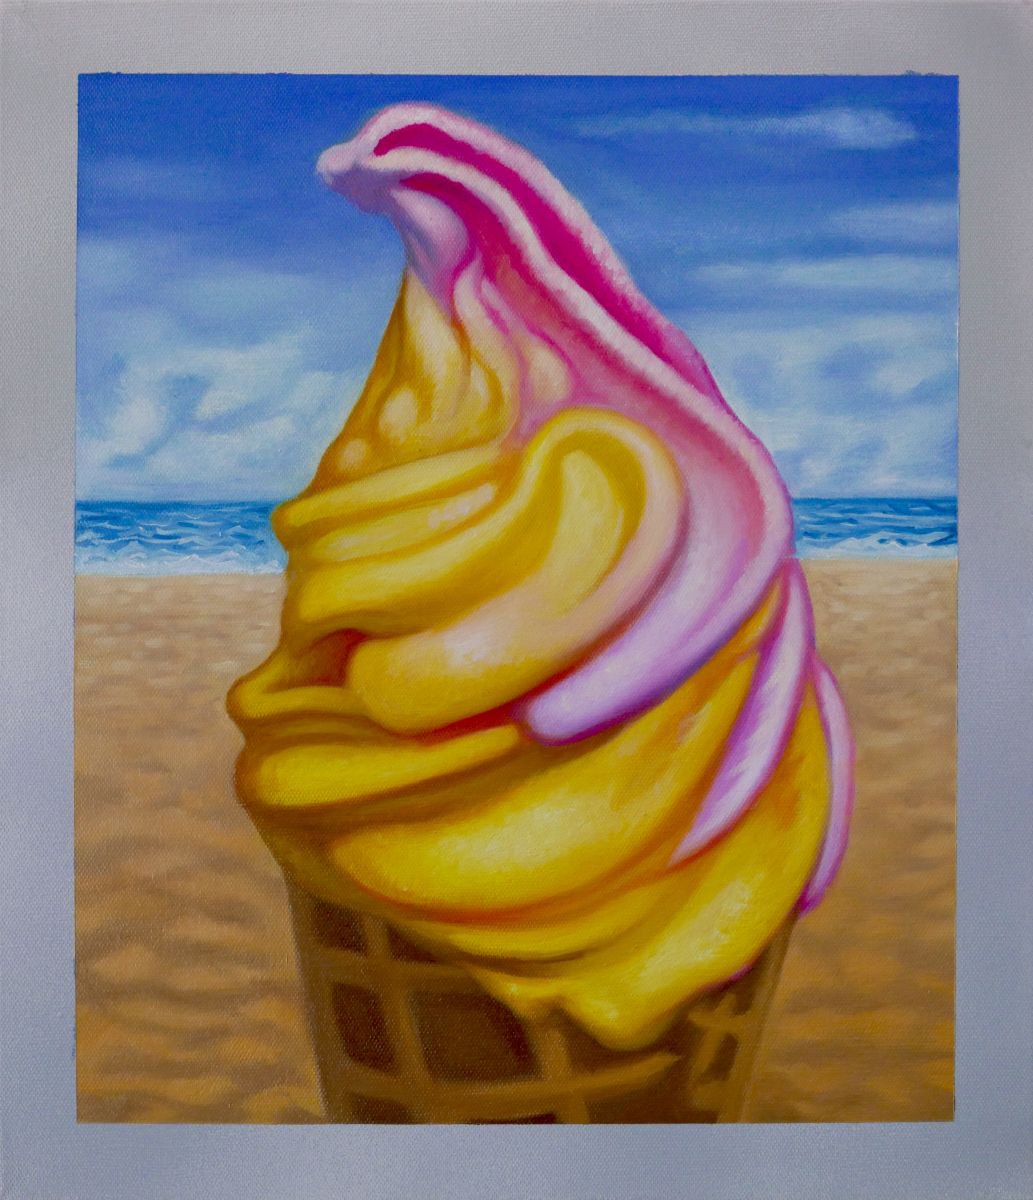 Soft serve (ice-cream) N?2 / Glace italienne N?2 by Philippe Olivier